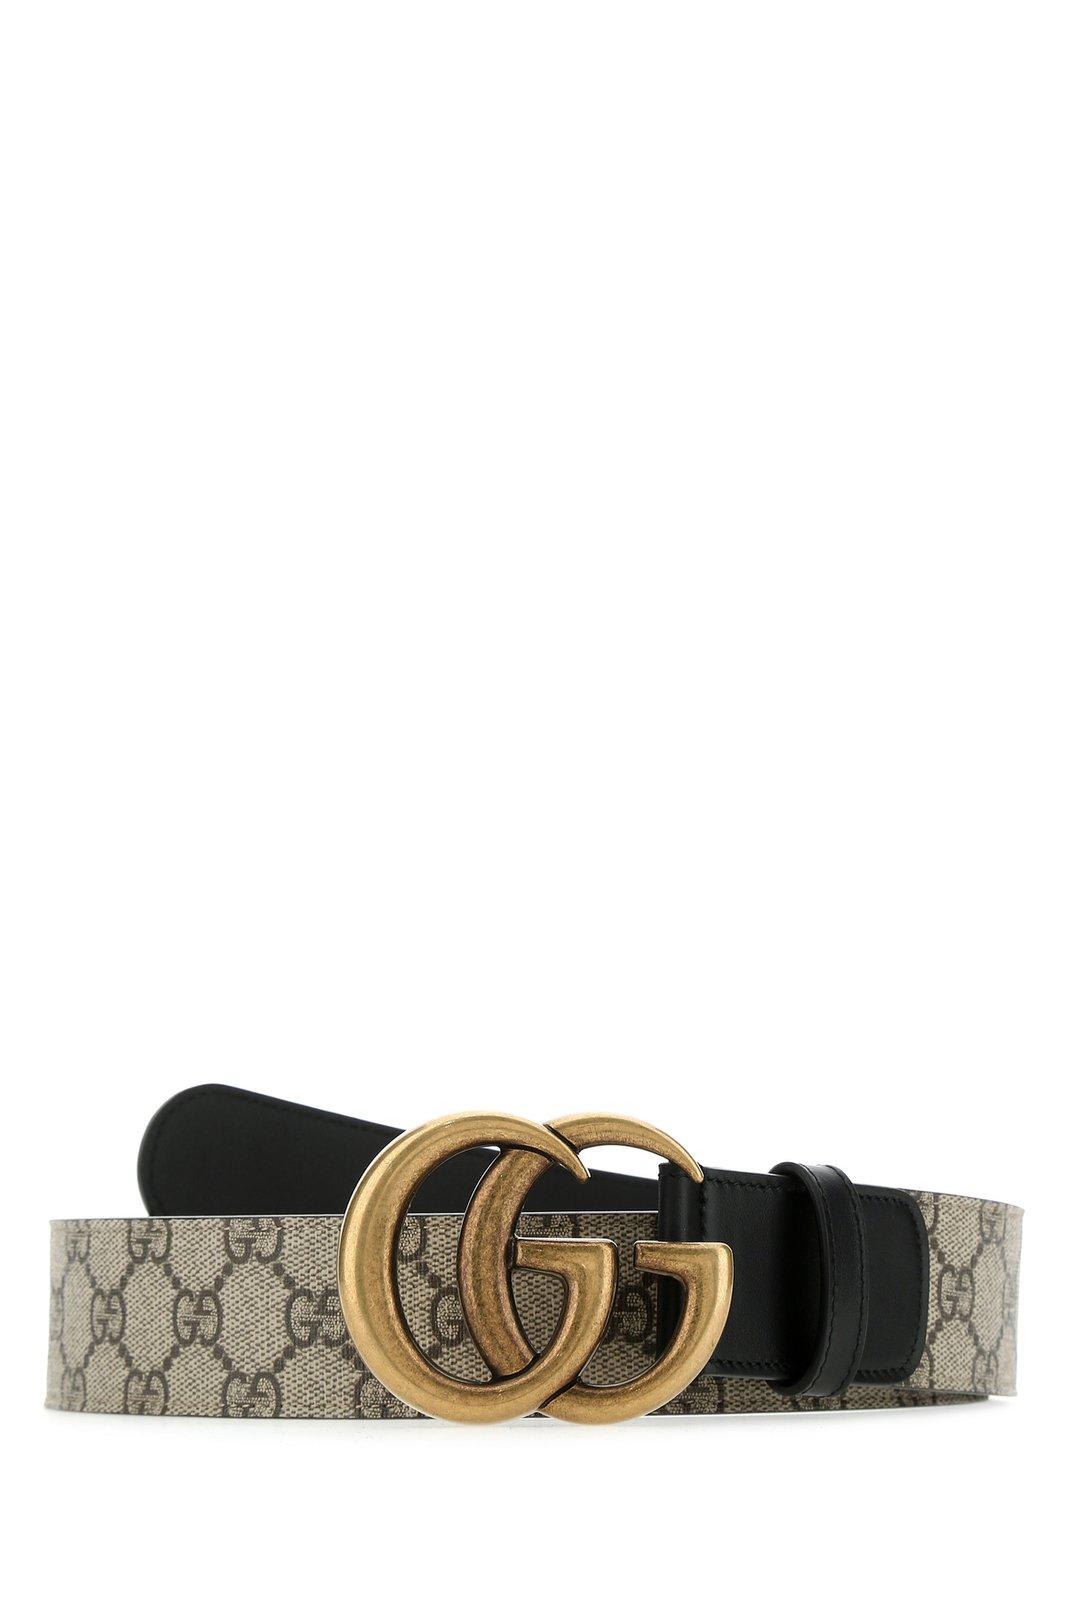 Gucci Gg Marmont Buckle Belt